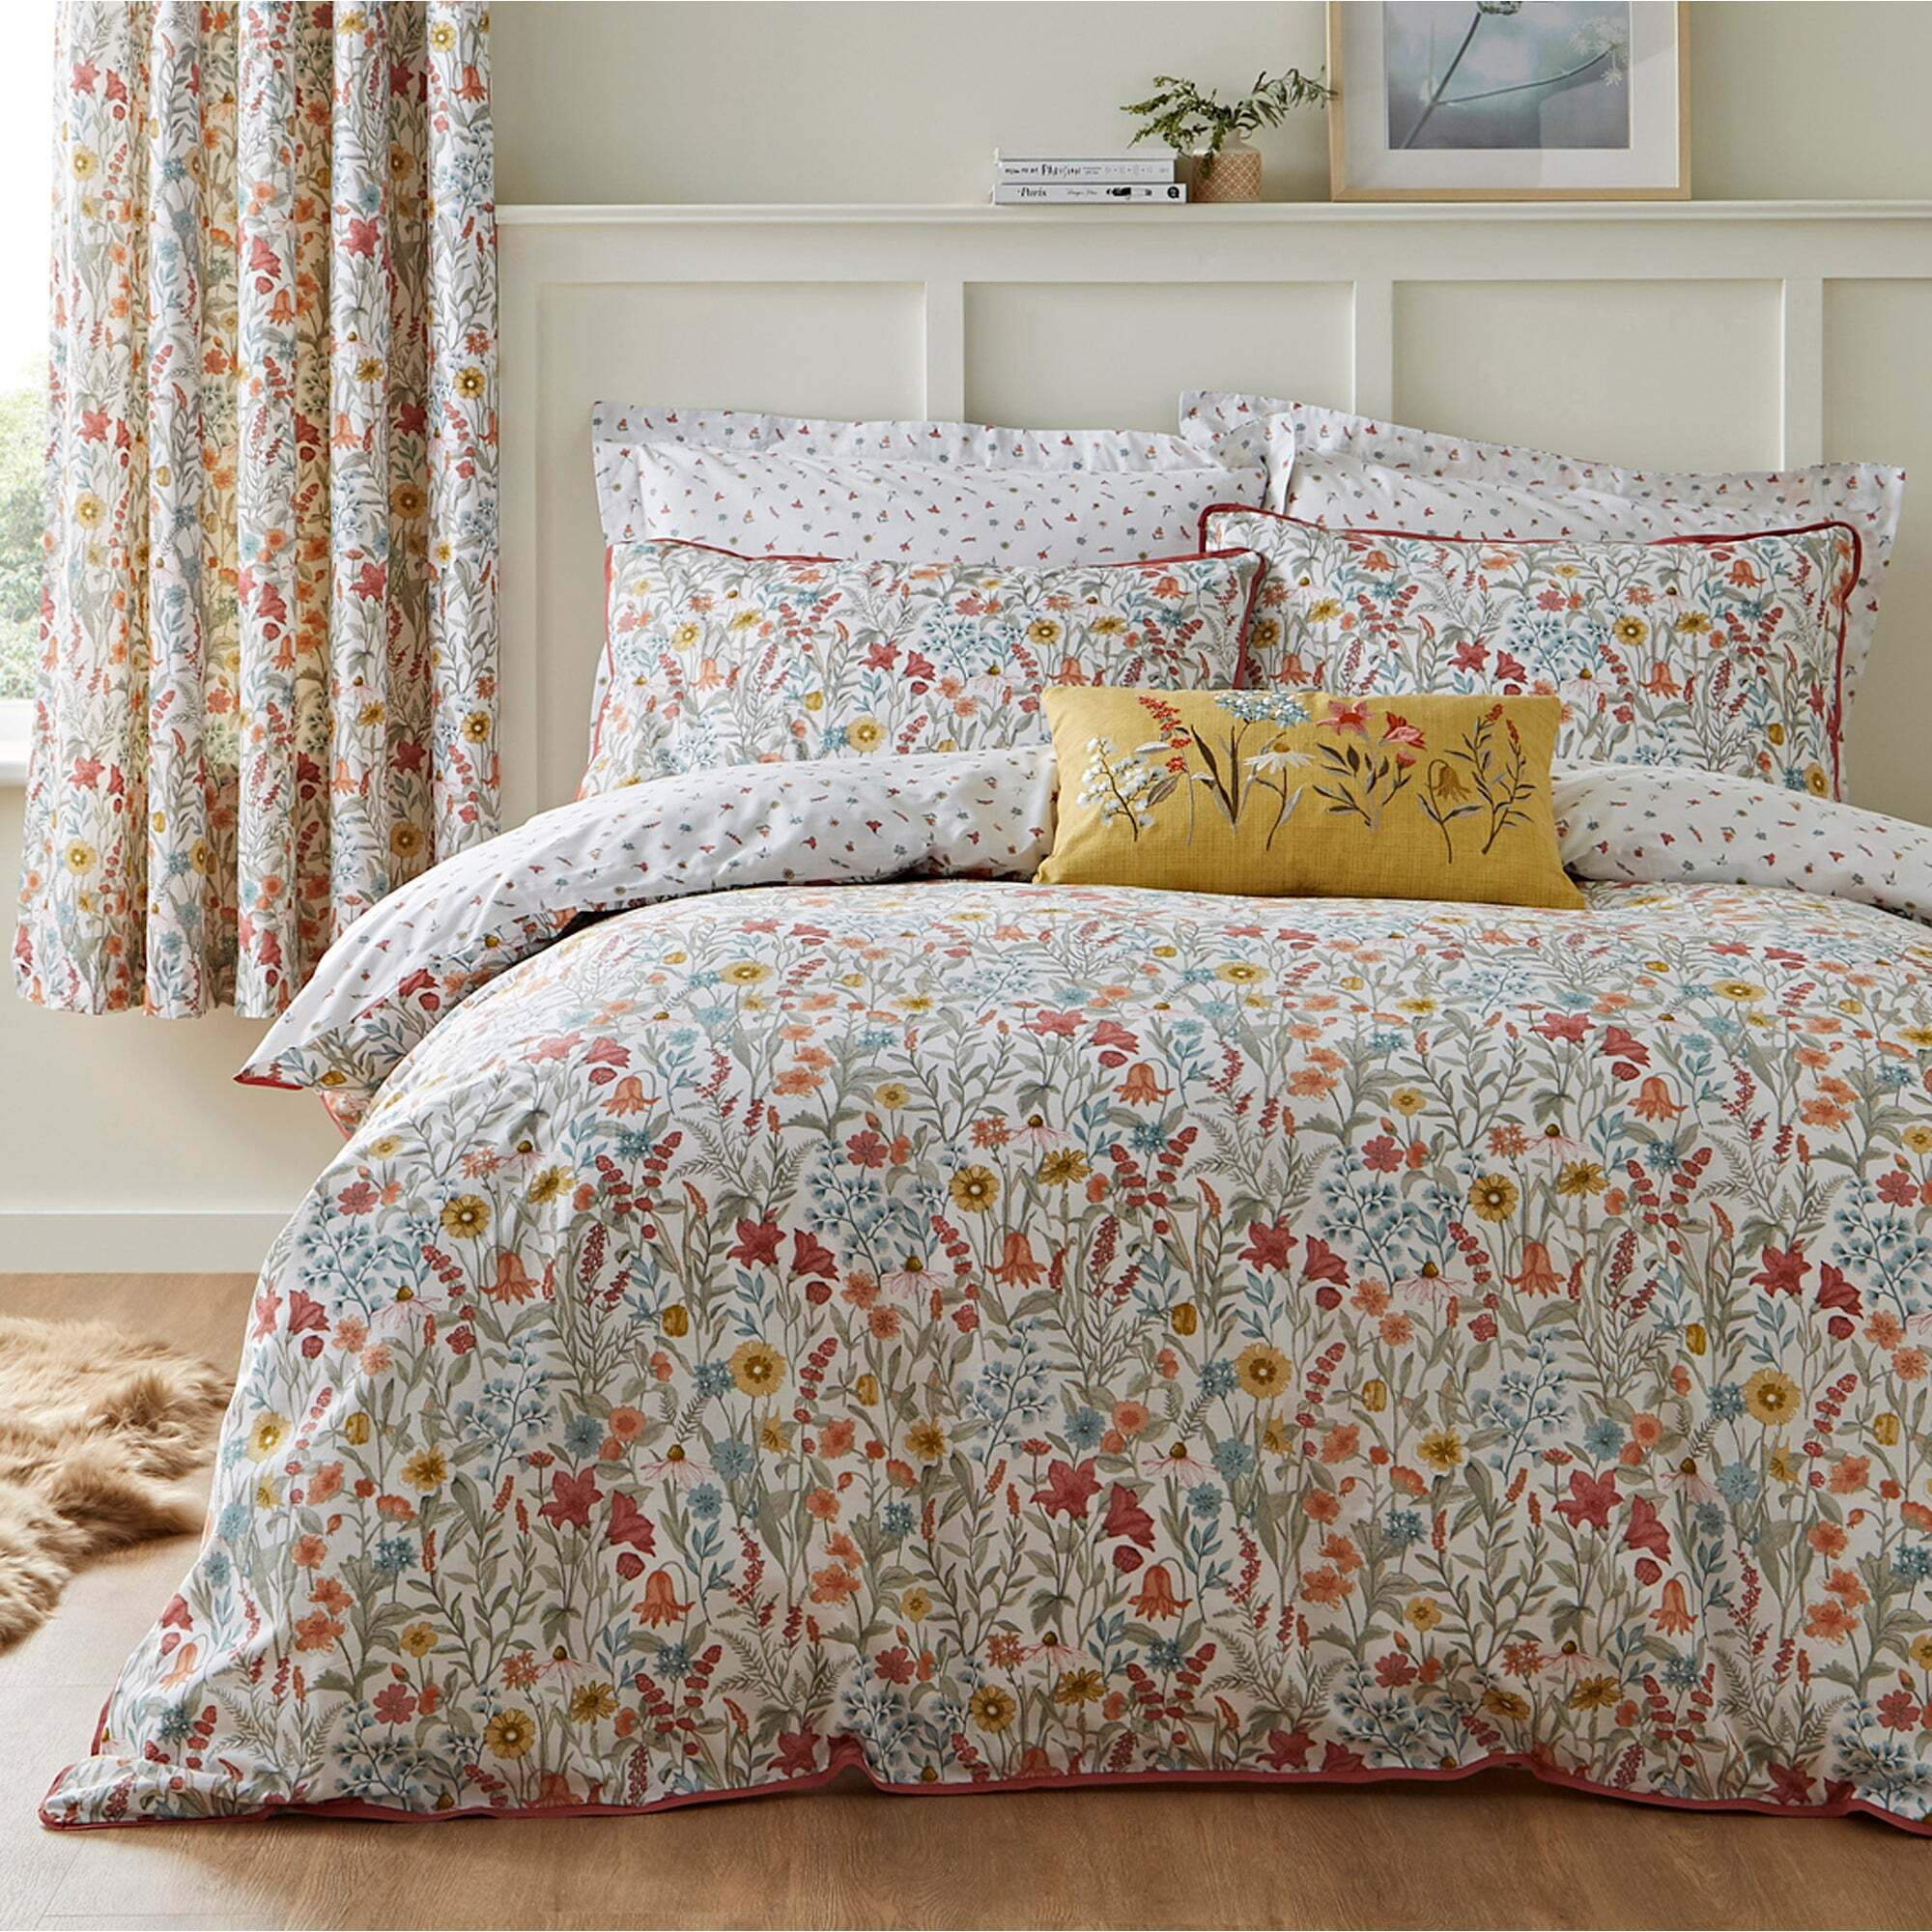 Meadow Ditsy Floral Red 100% Cotton Reversible Duvet Cover and Pillowcase Set Red/White/Green